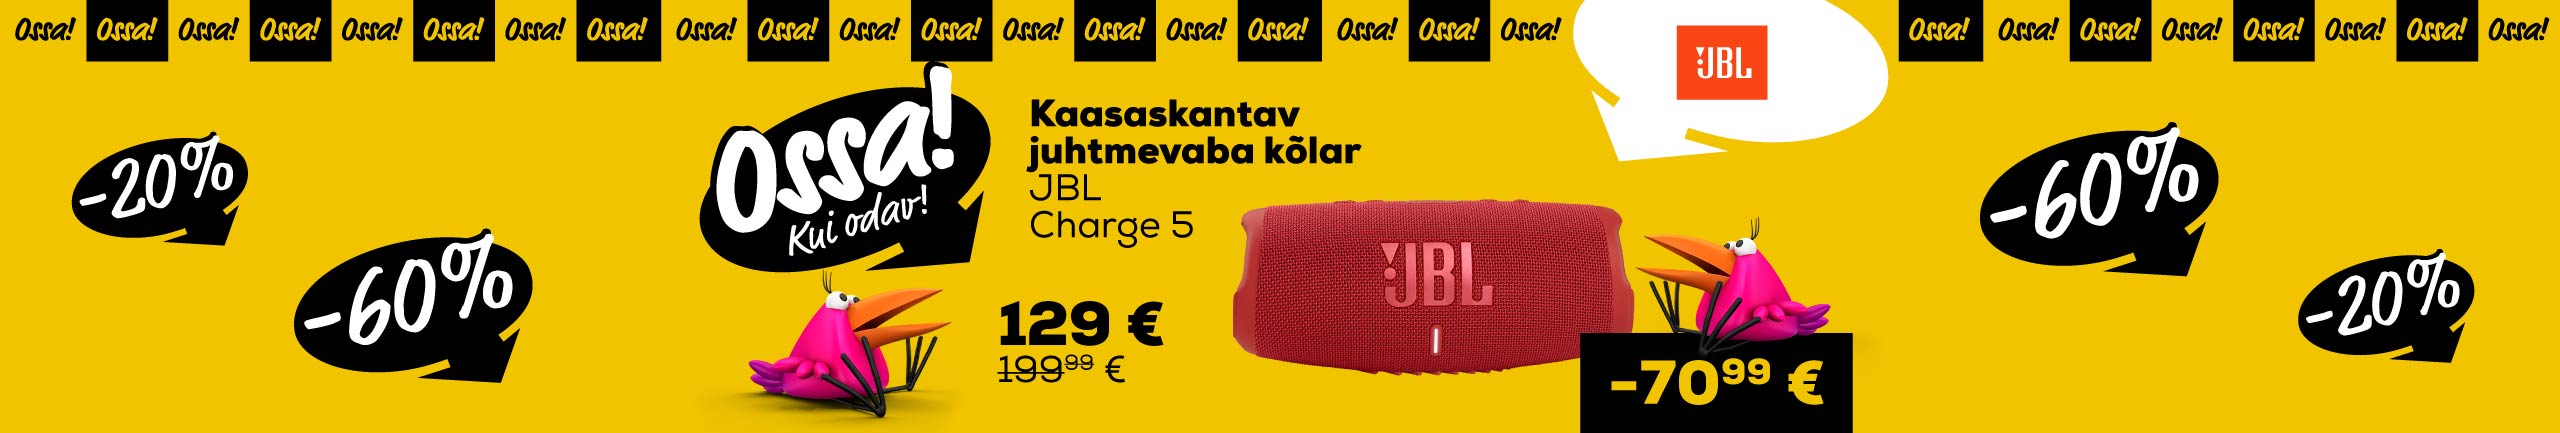 FPS Ossa extended! We added new products! Wireless portable speaker JBL Charge 5 